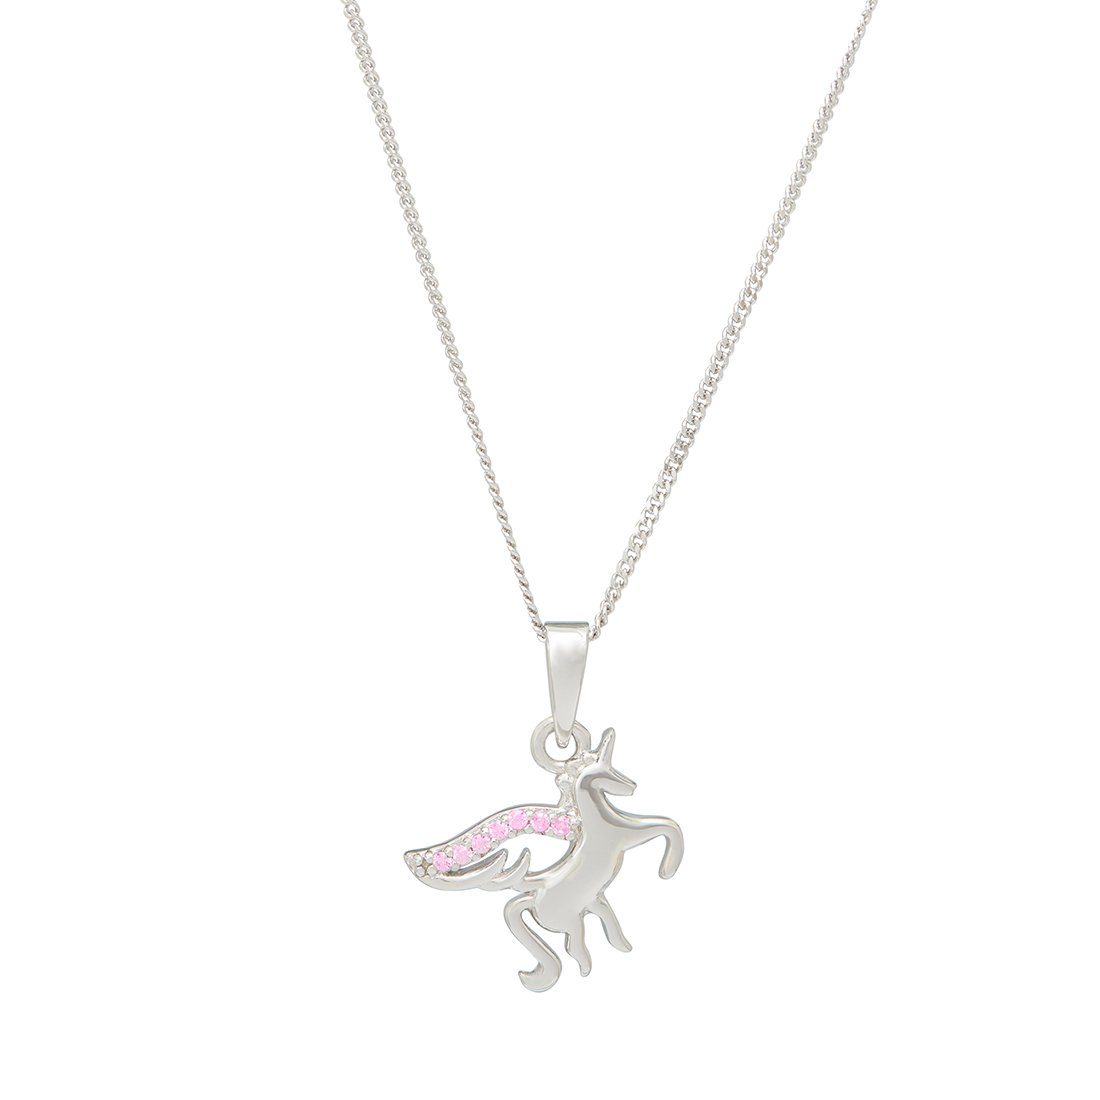 Children's Pink Cubic Zirconia Unicorn Necklace in Sterling Silver Necklaces Bevilles 